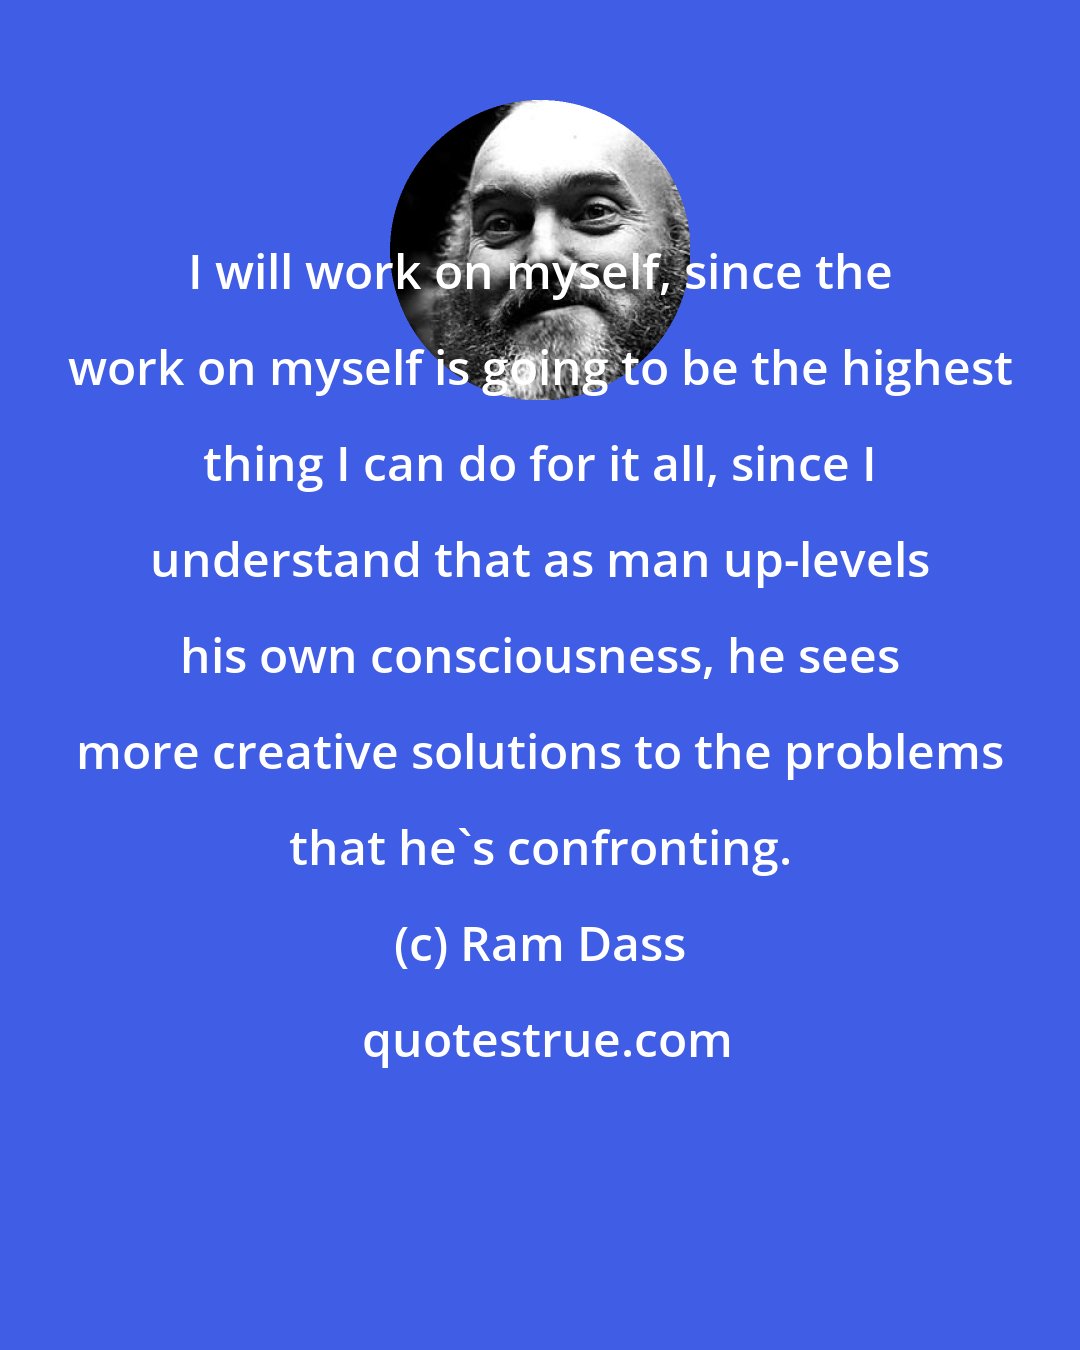 Ram Dass: I will work on myself, since the work on myself is going to be the highest thing I can do for it all, since I understand that as man up-levels his own consciousness, he sees more creative solutions to the problems that he's confronting.